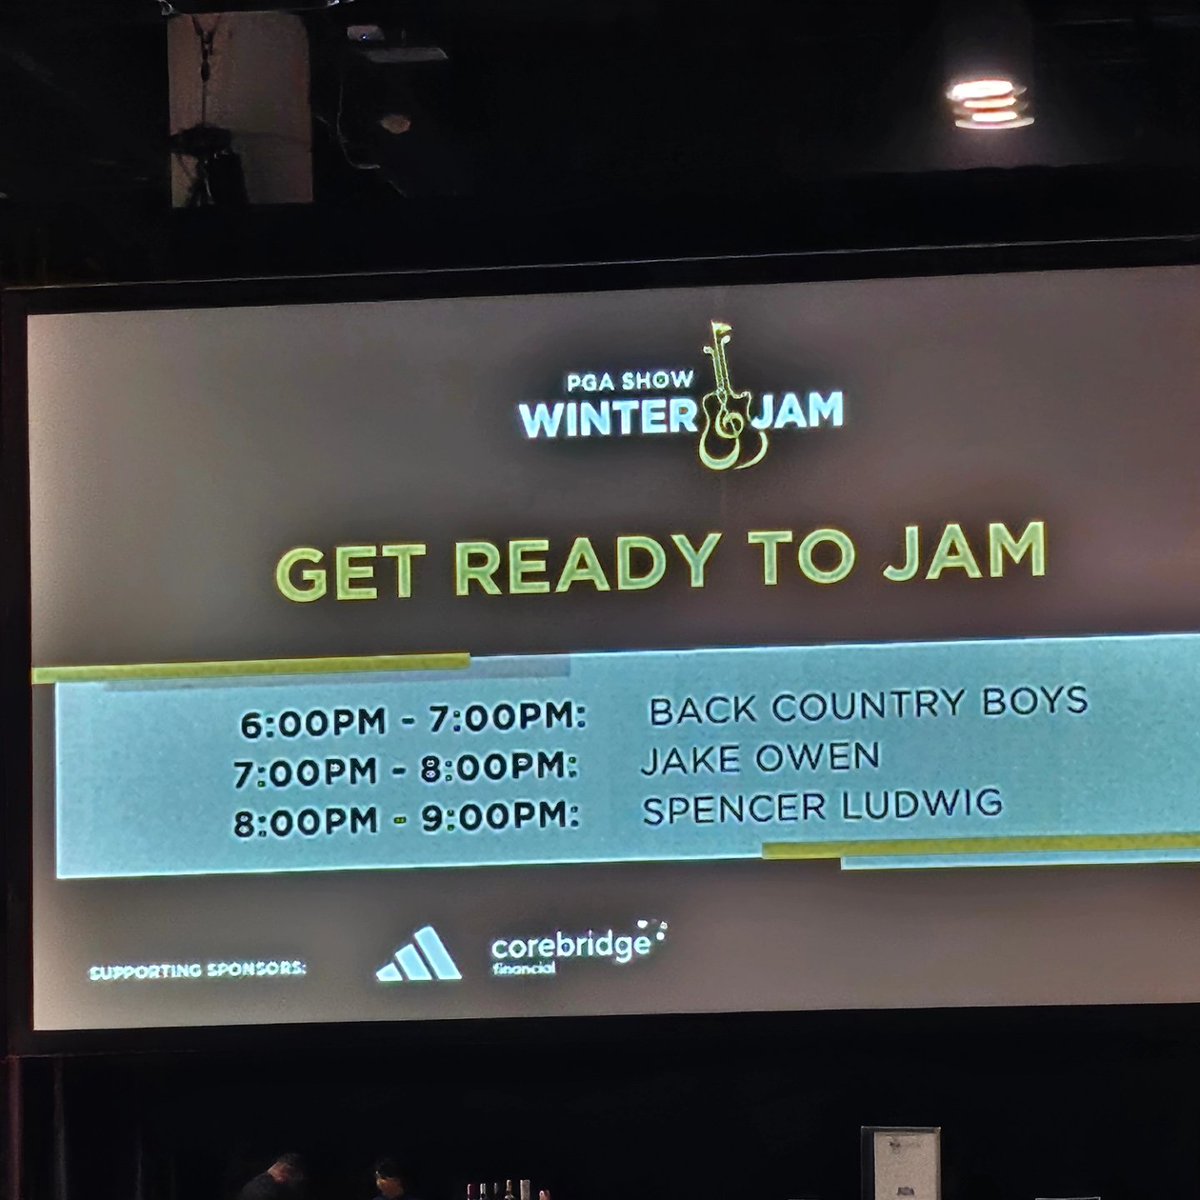 Going to be a fun night with Back Country Boys and @jakeowen at @PGAShow #PGAShow2024 #countrymusic